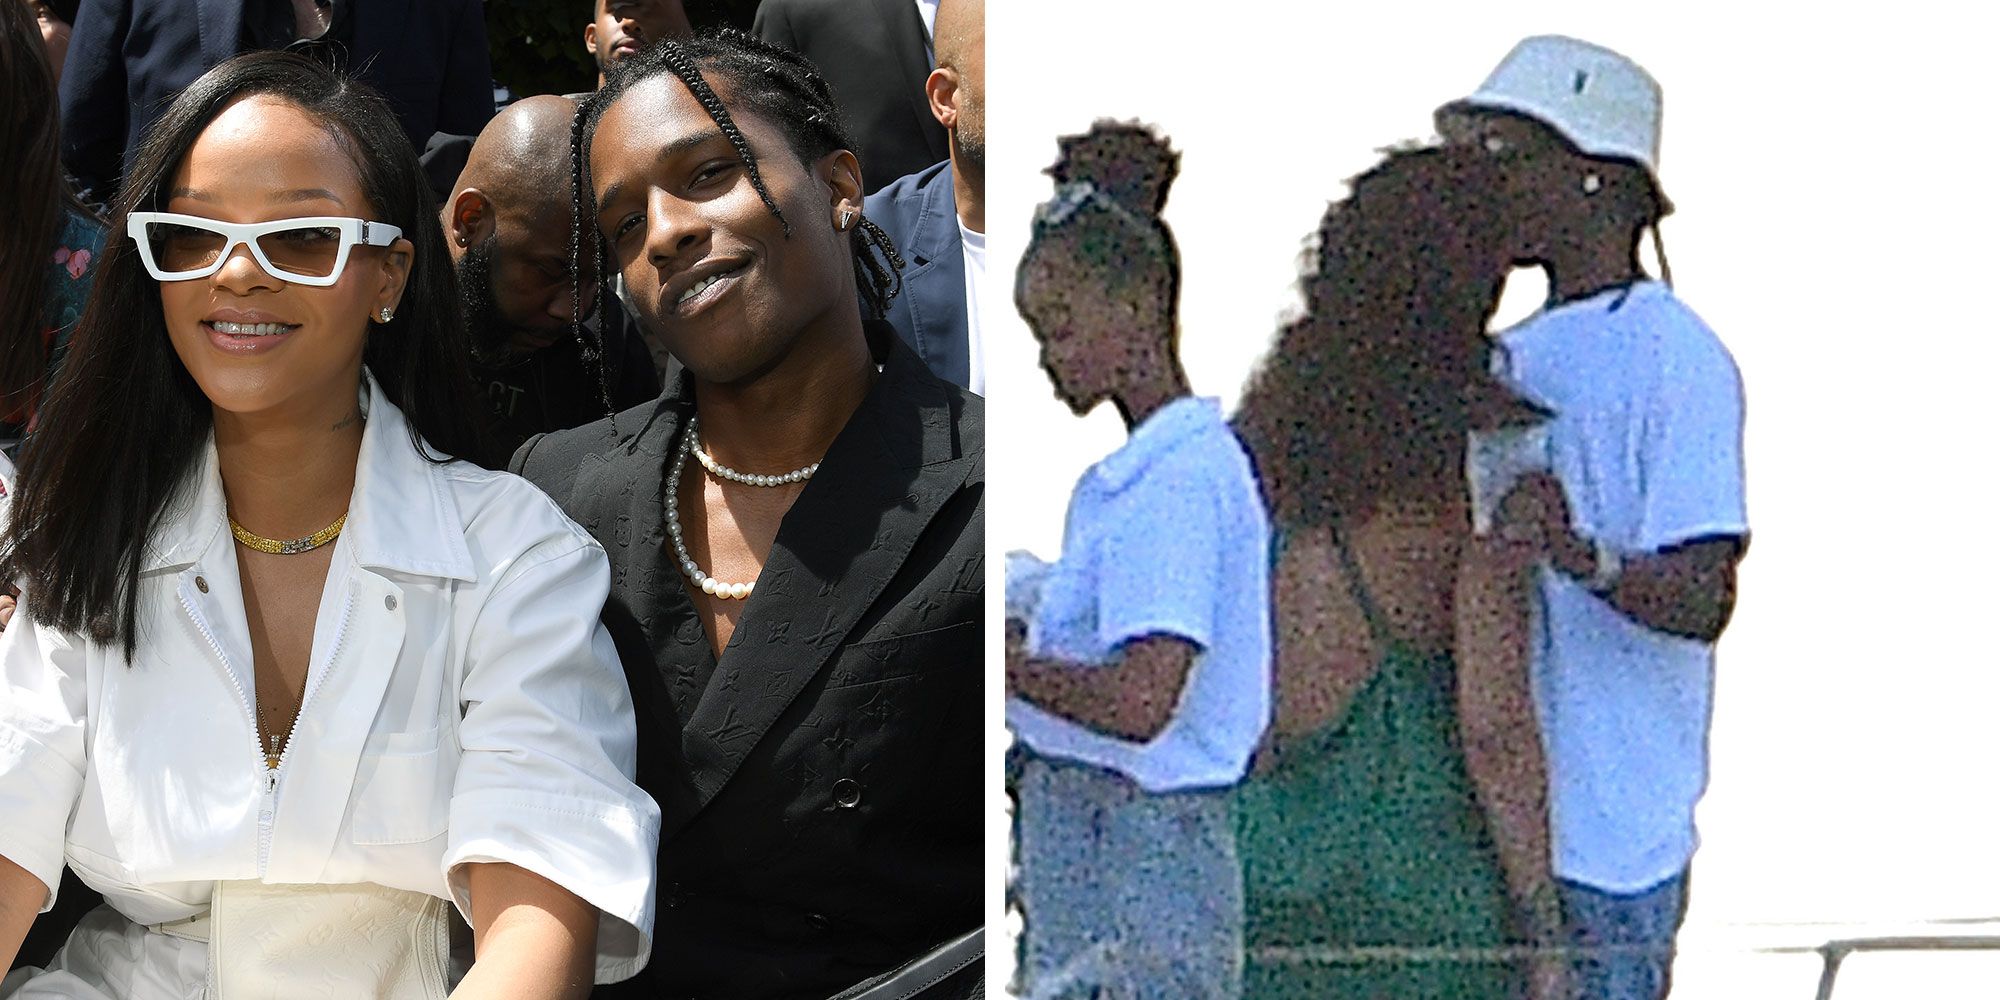 ASAP Rocky arrives in girlfriend Rihanna's native country Barbados